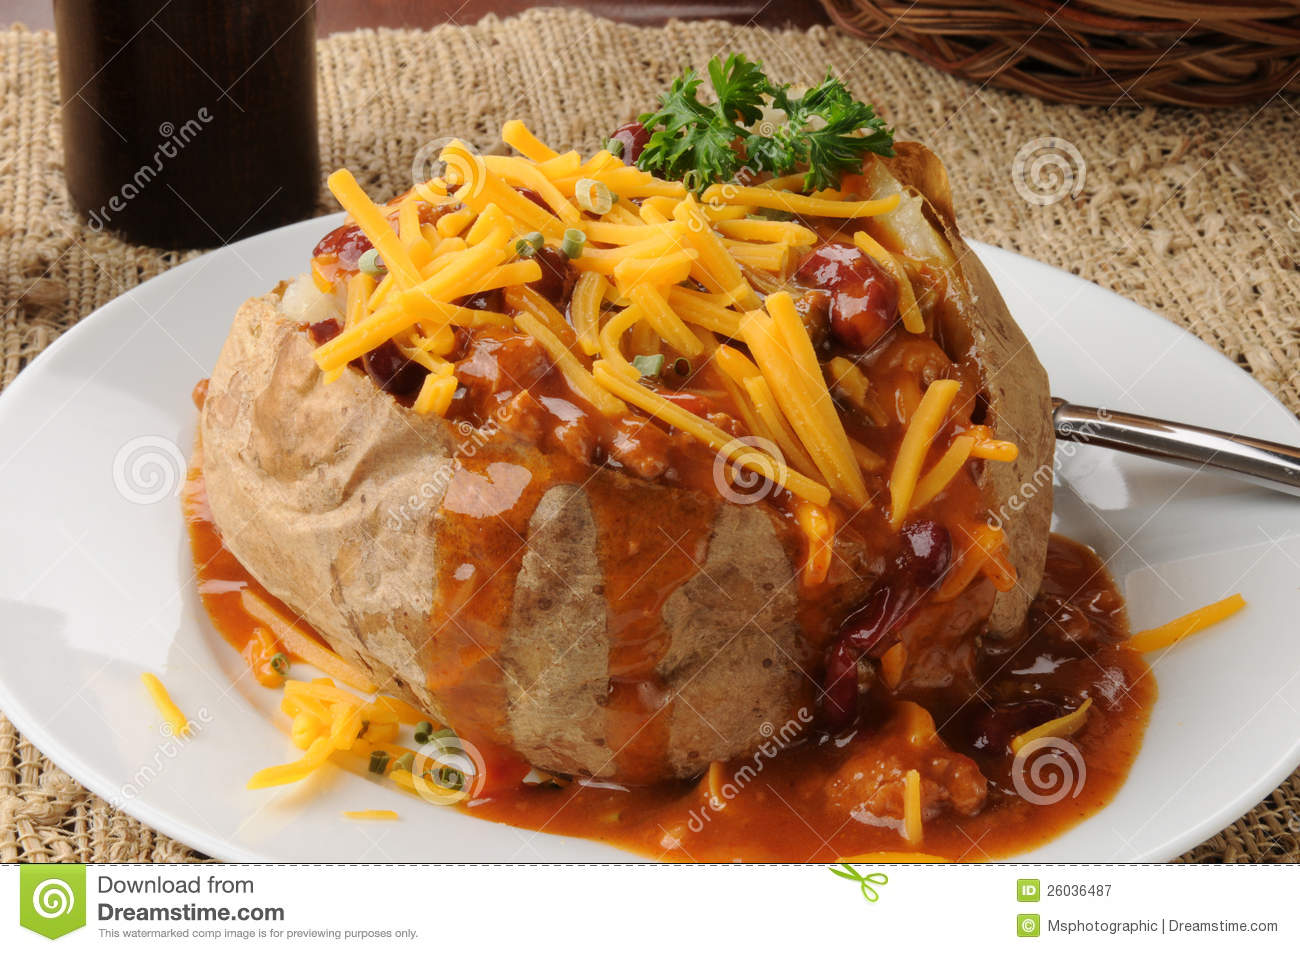 Baked Potato With Chile And Cheese Royalty Free Stock Photography